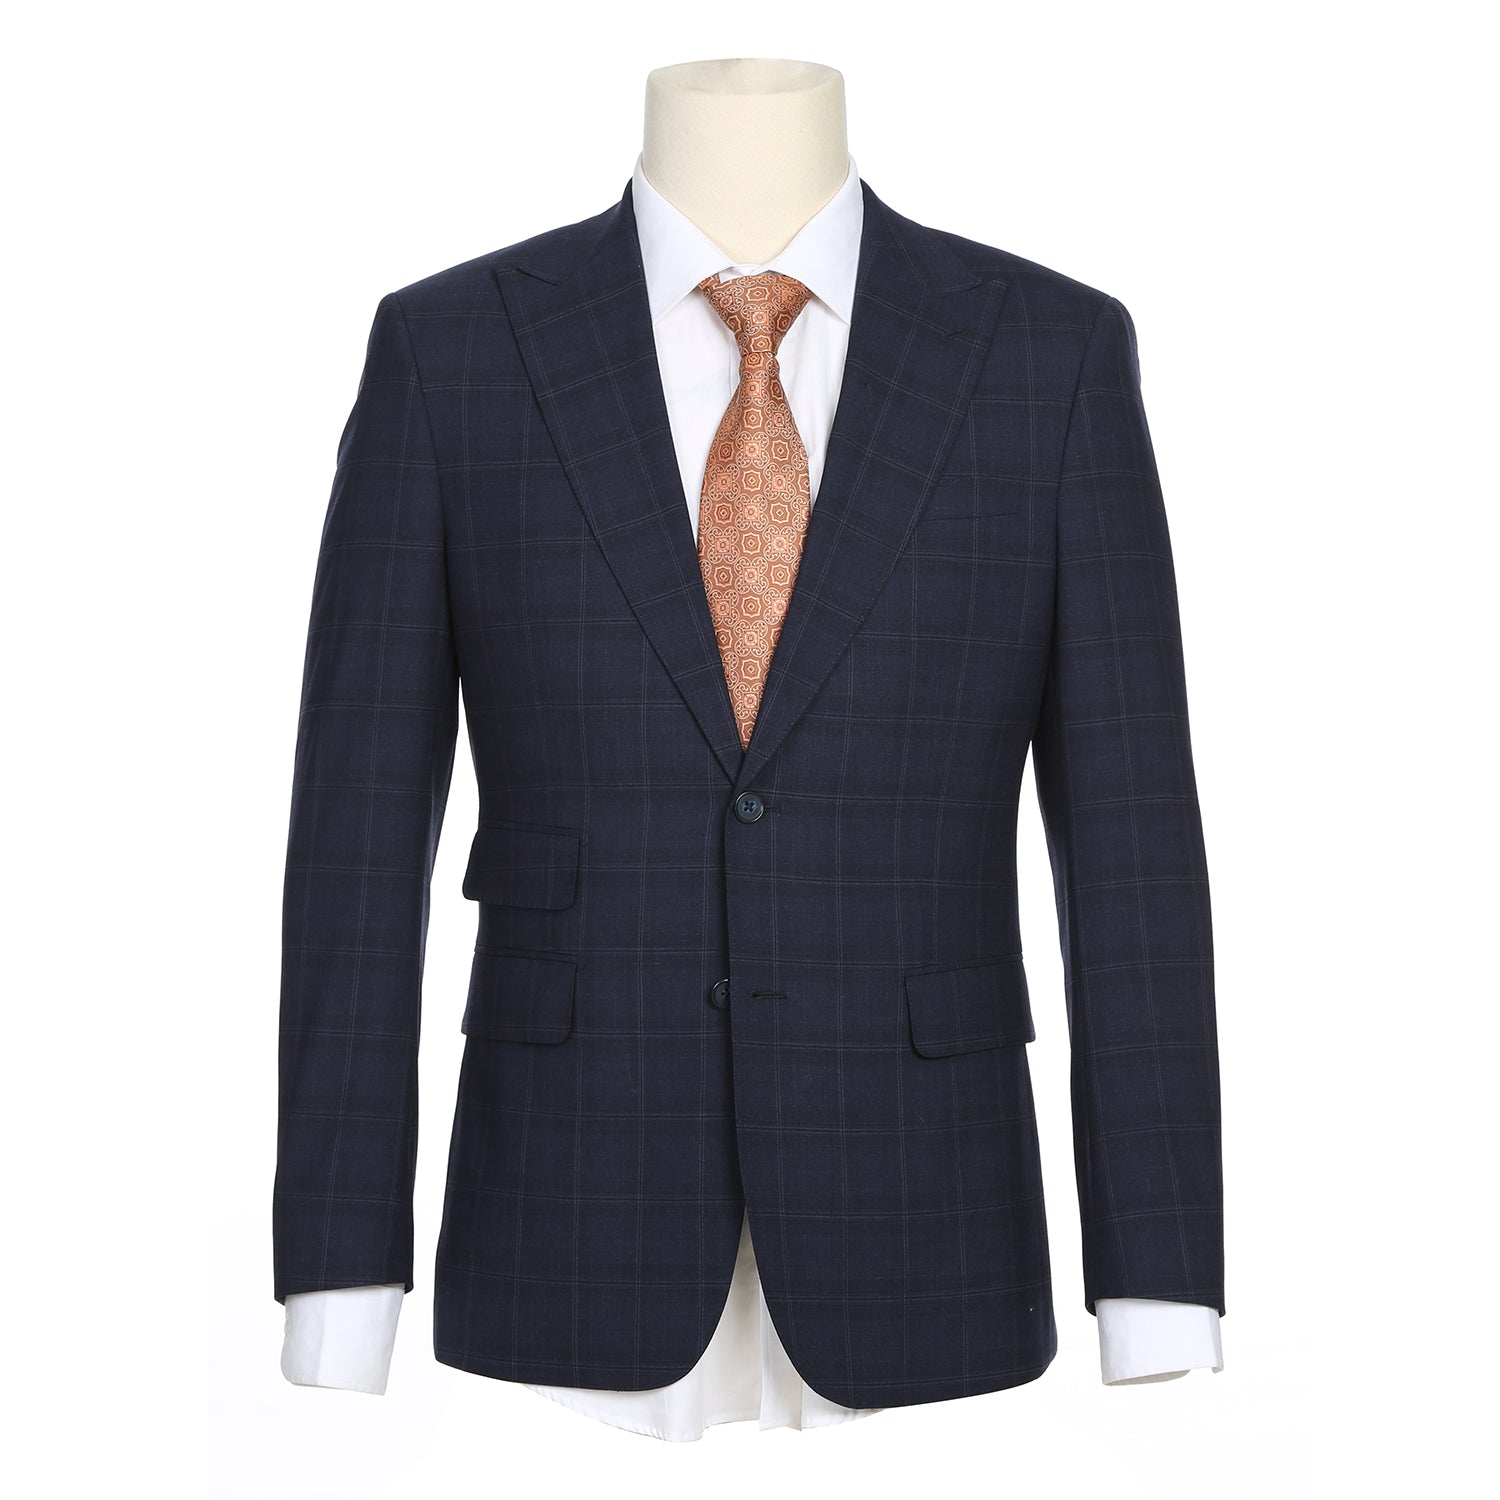 English Laundry Dark Blue Checked Wool Suit